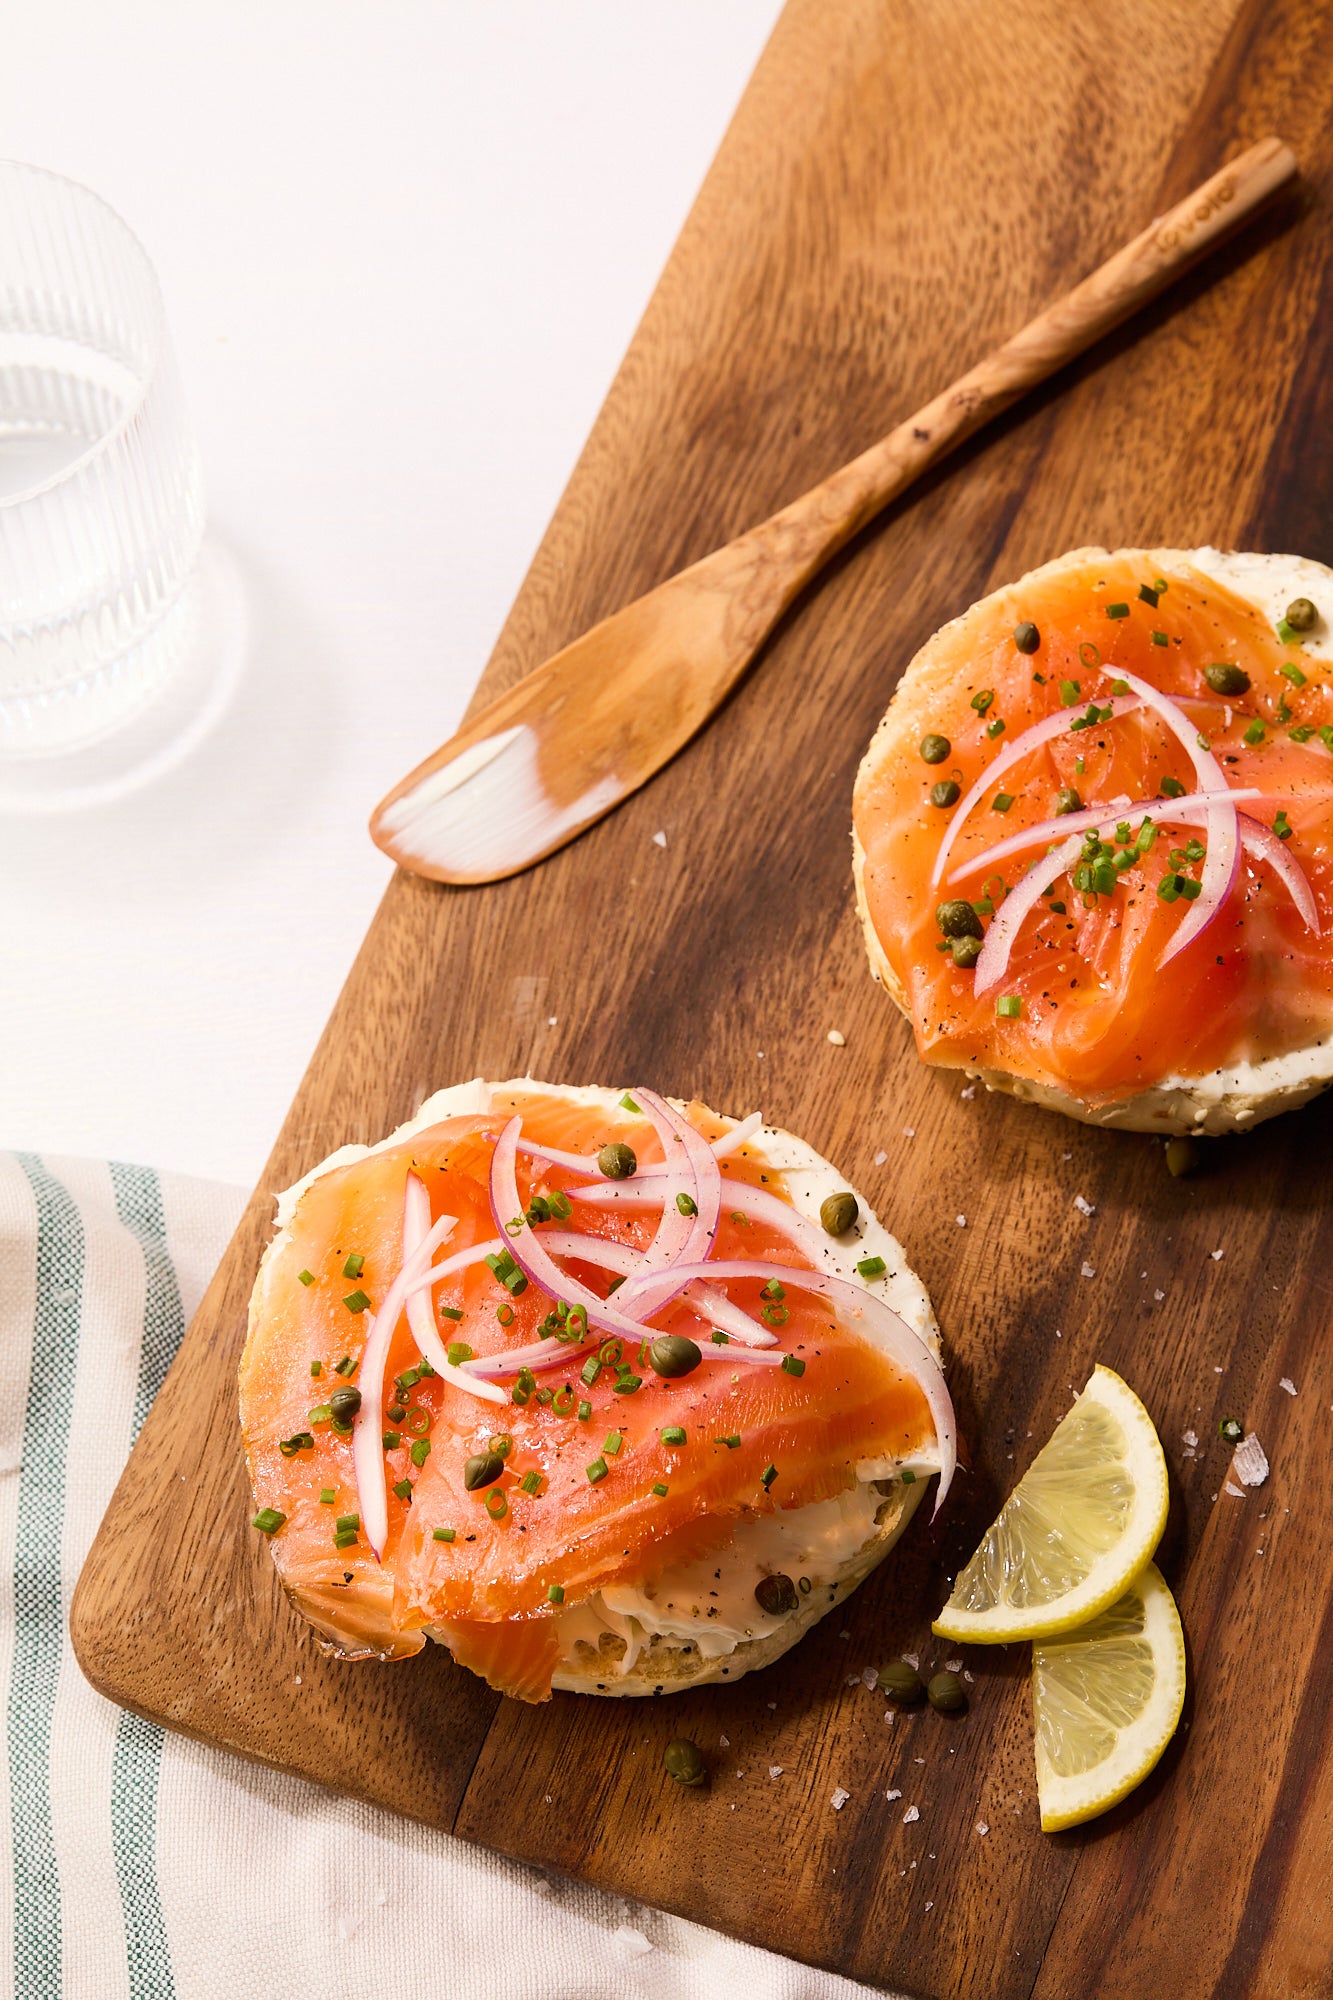 Cold-Smoked "Lox" Fillet